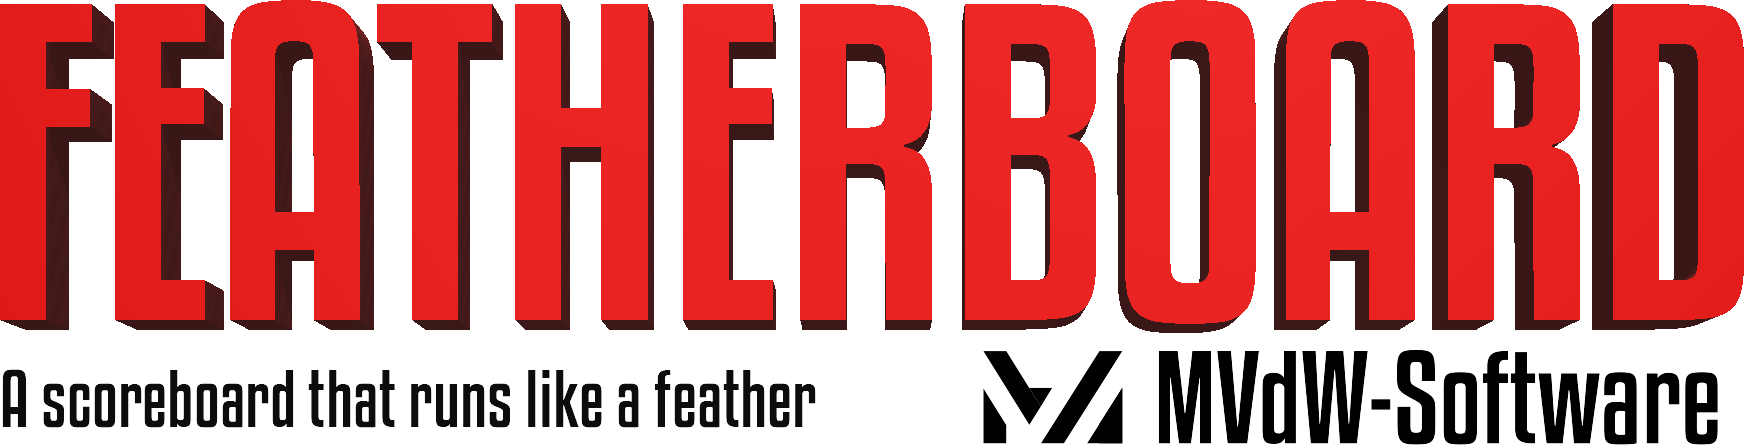 featherboard_logo.png